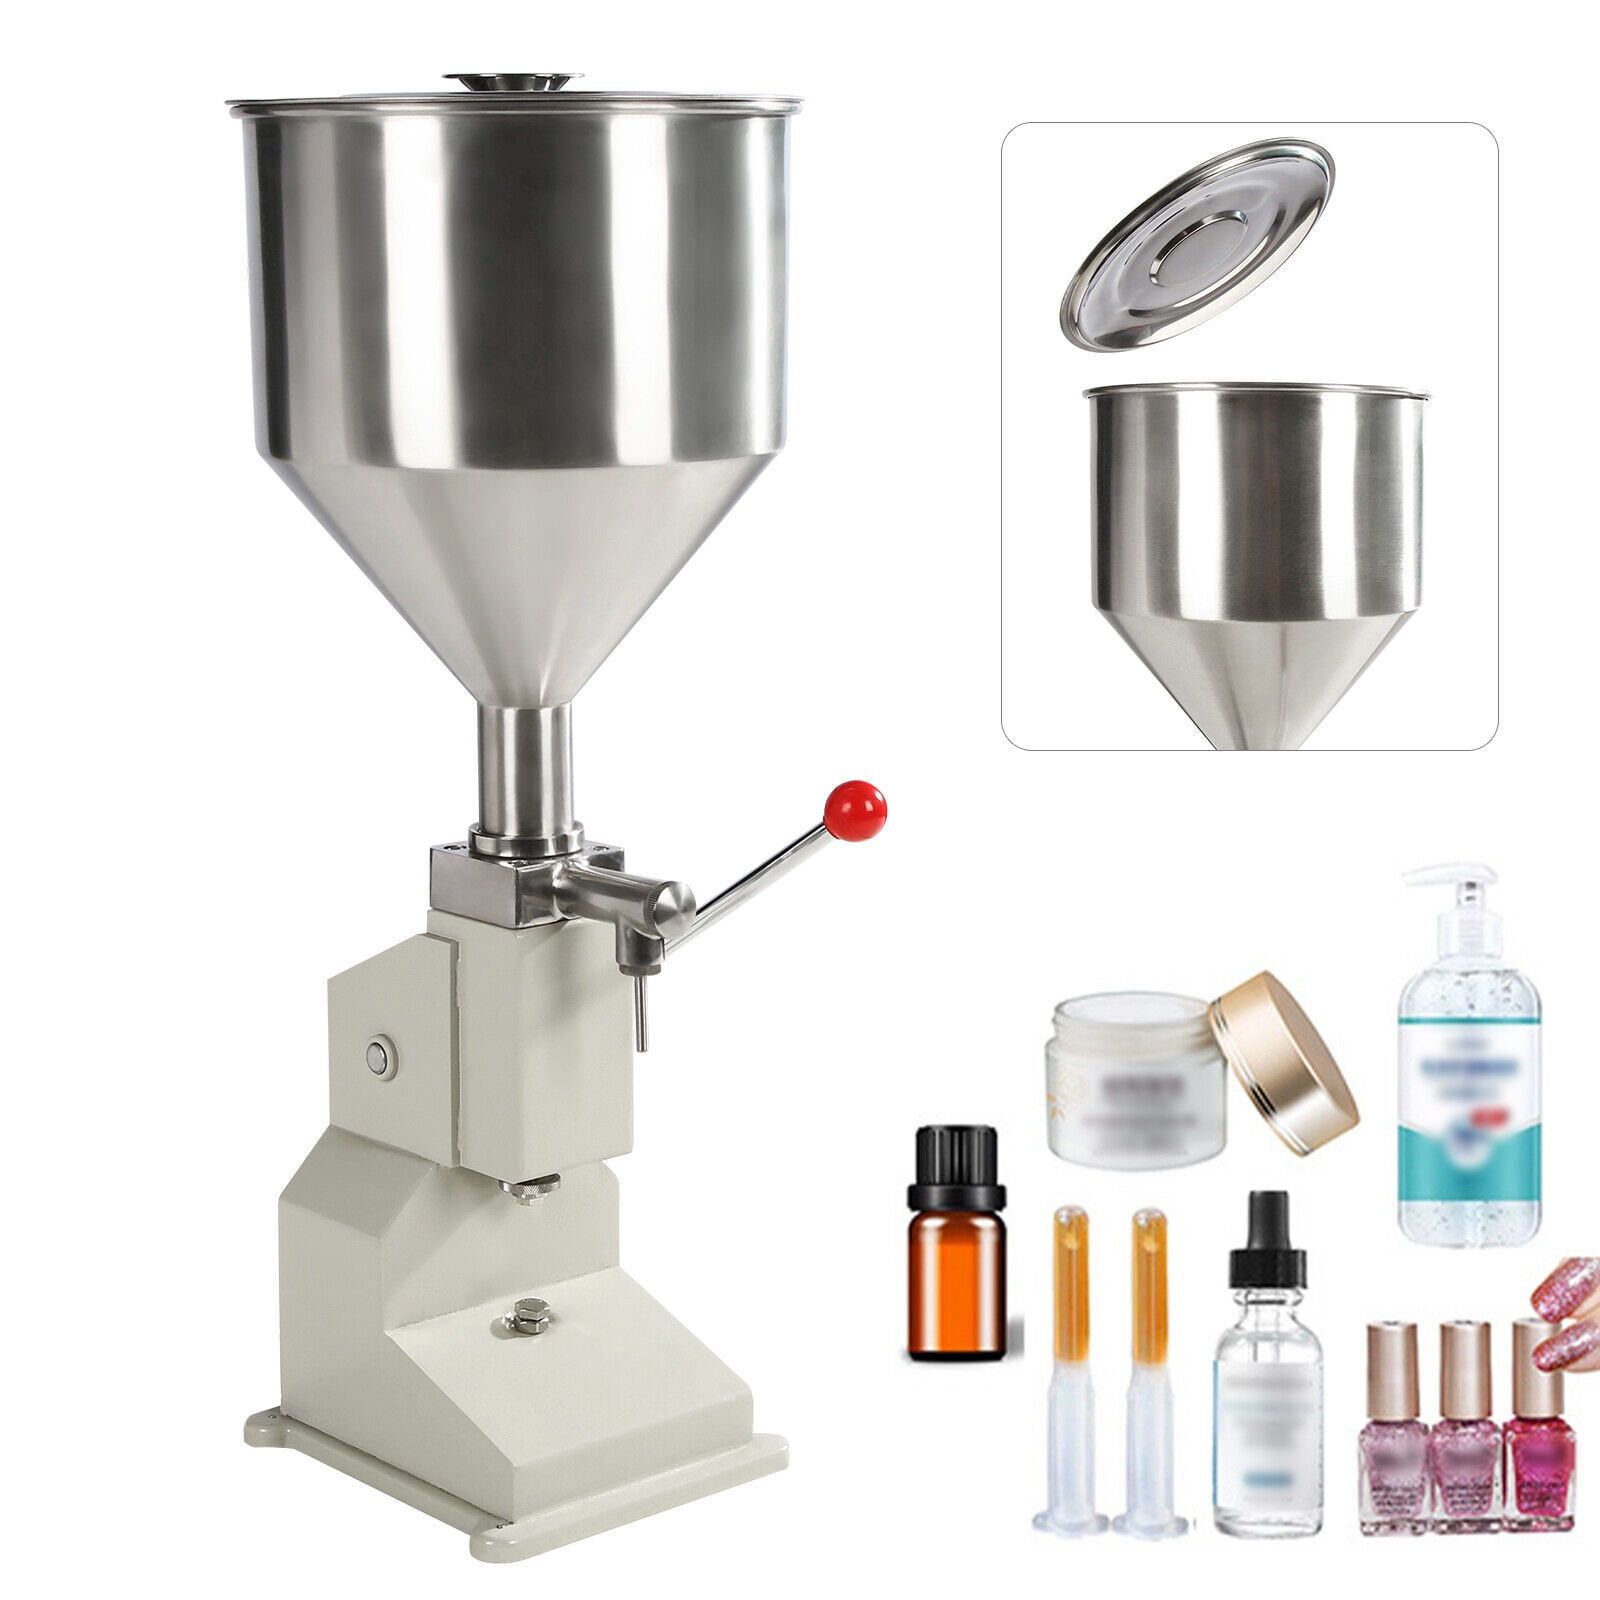 Factory Support Lip Gloss Filler Cosmetic Cream Filling Machine - Buy  Factory Support Lip Gloss Filler Cosmetic Cream Filling Machine Product on